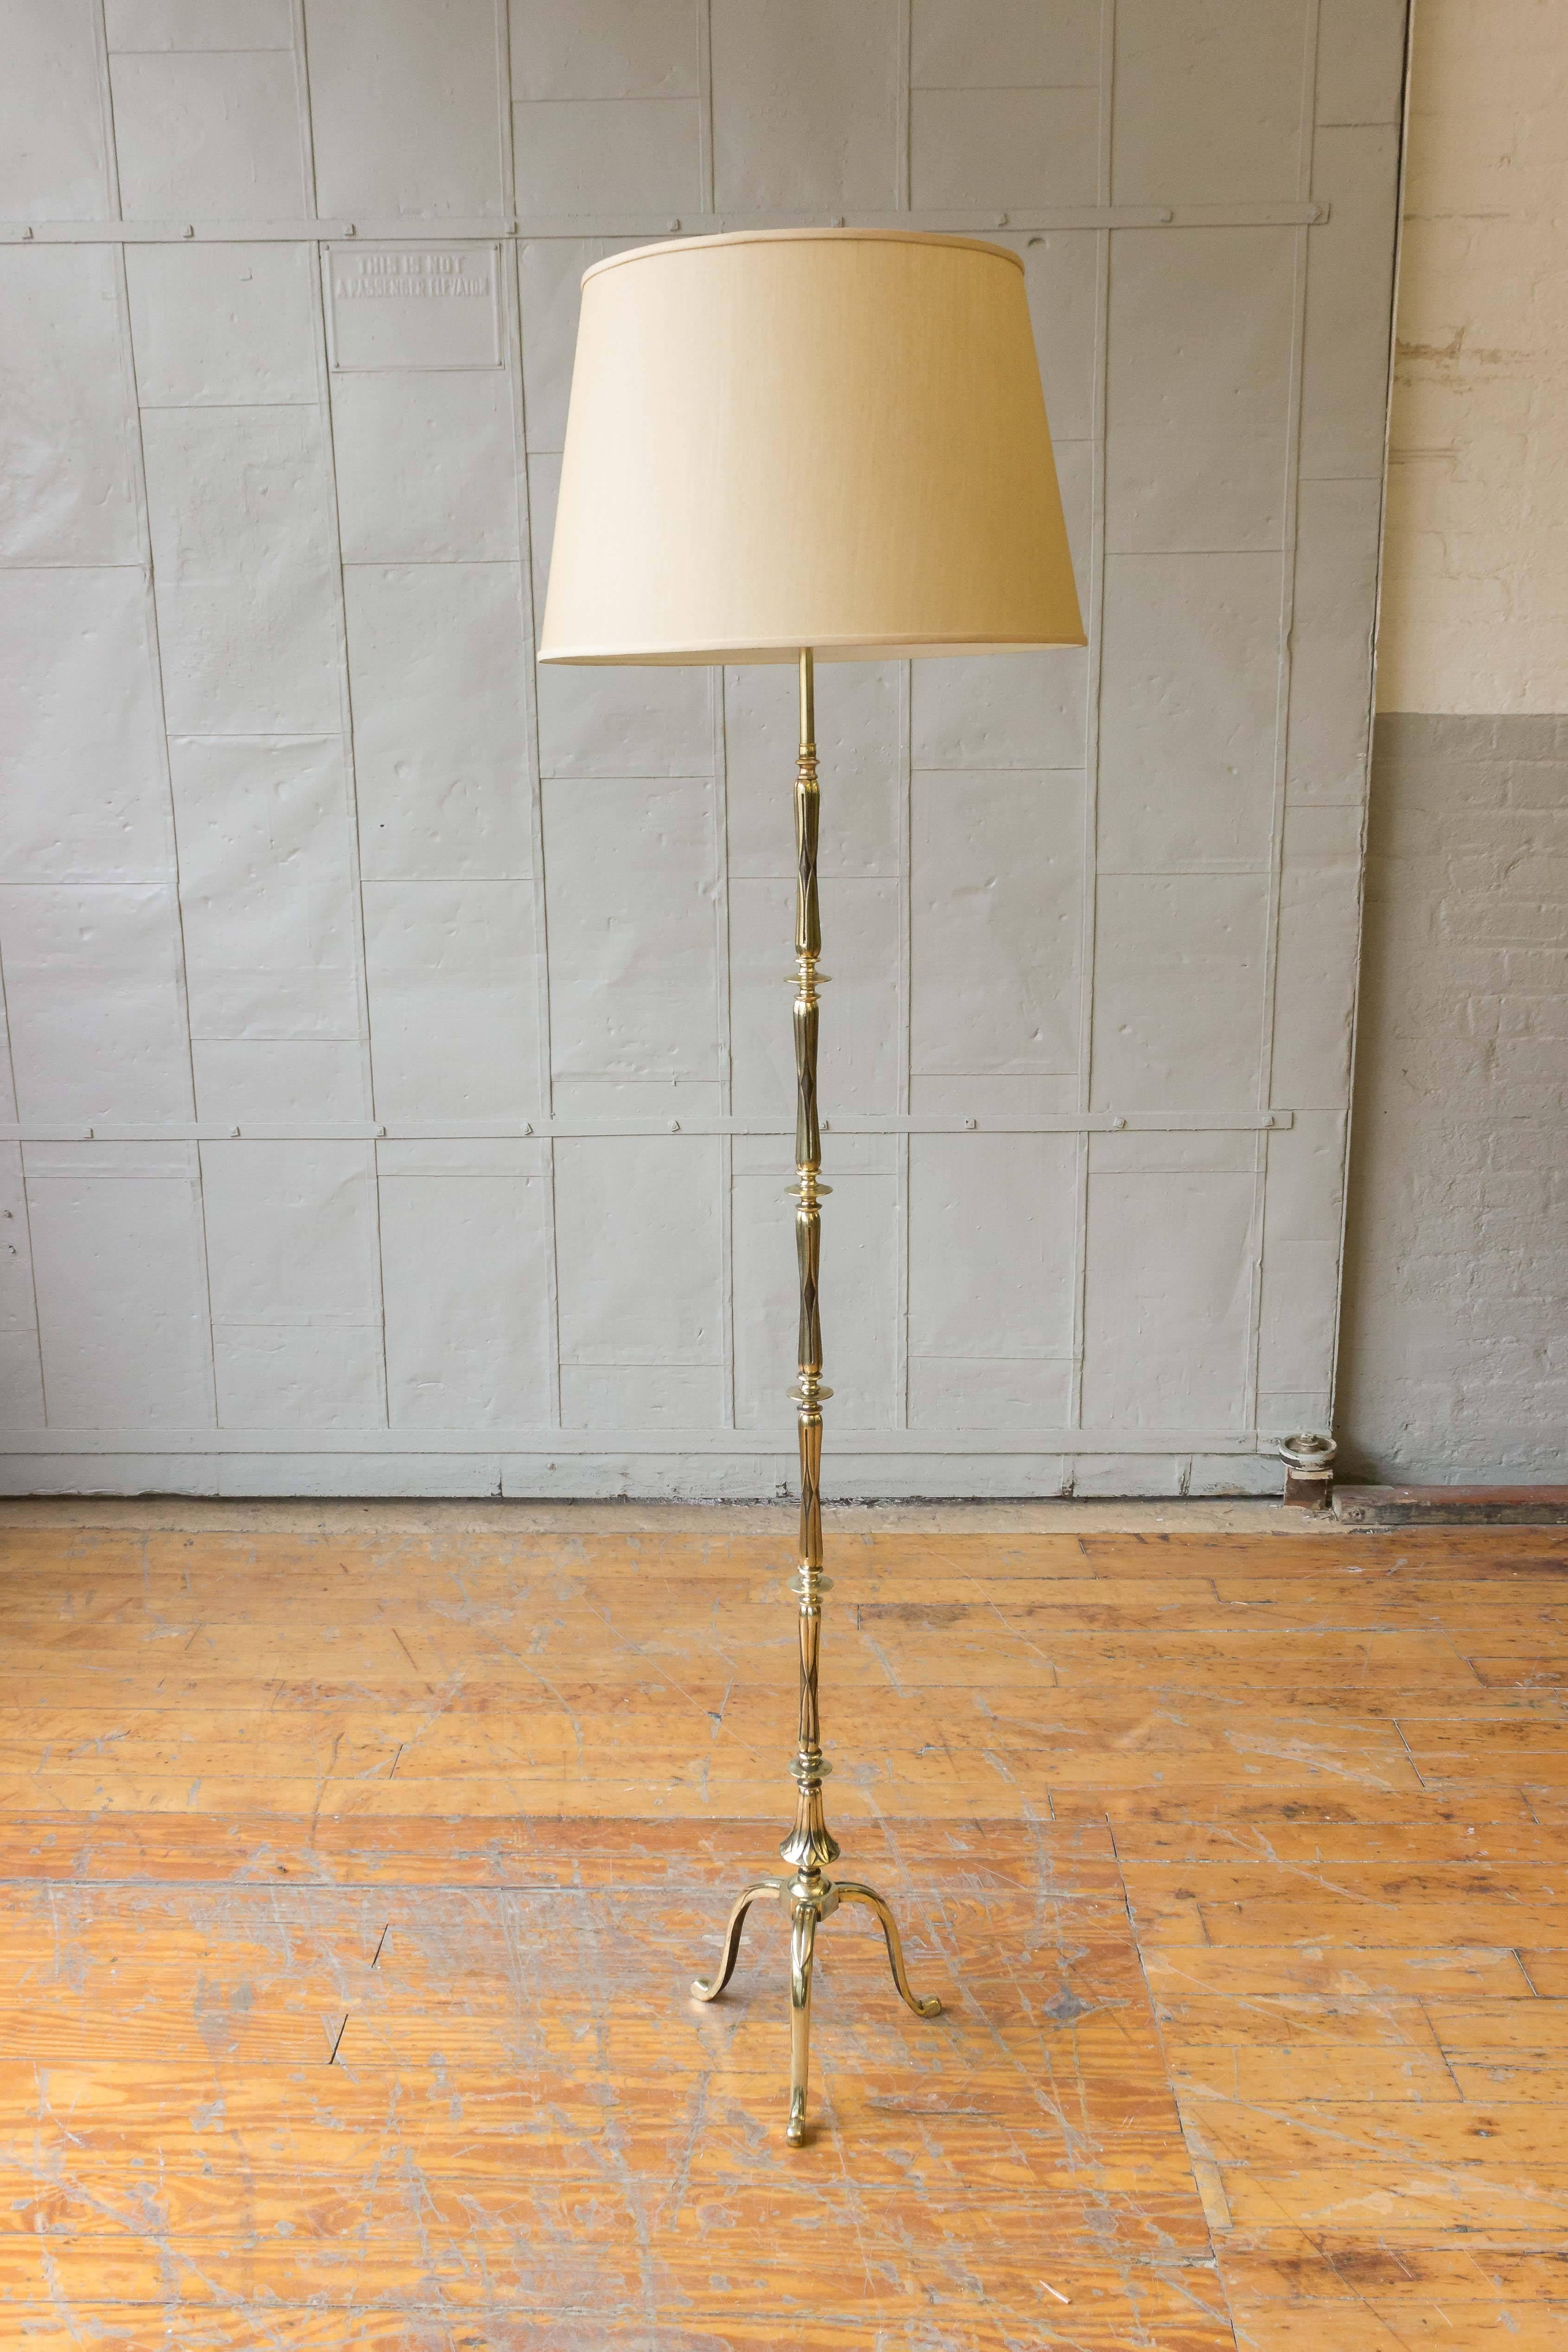 Pair of French bronze Art Deco style floor lamps with intricate detailed stem and base. The floor lamps have recently been rewired and polished . Quote for professional UL code wiring is available on request. 

Not sold with shades.